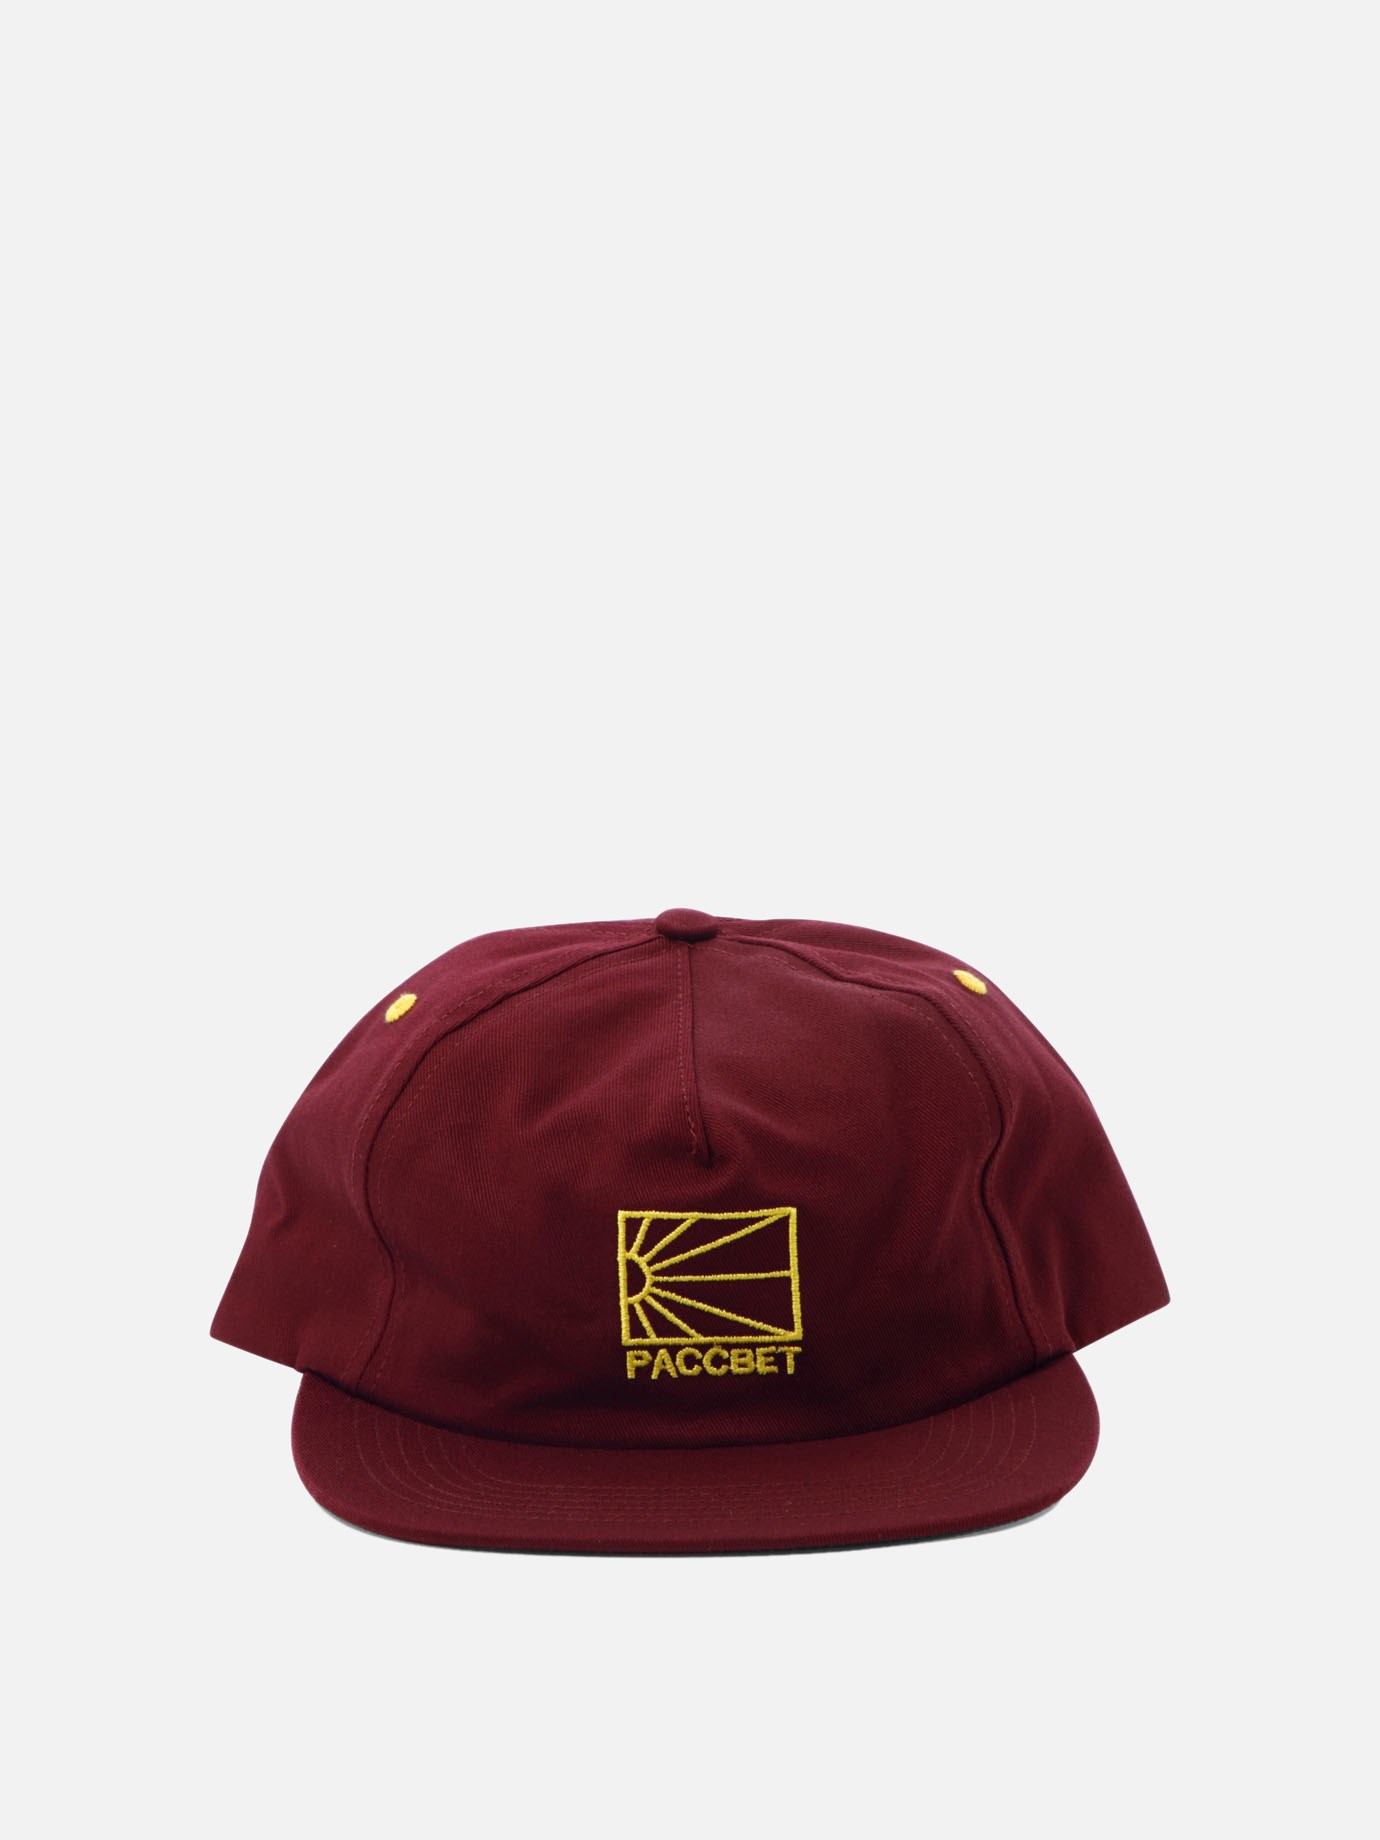 Cappello trucker  Paccbet by Paccbet - 3